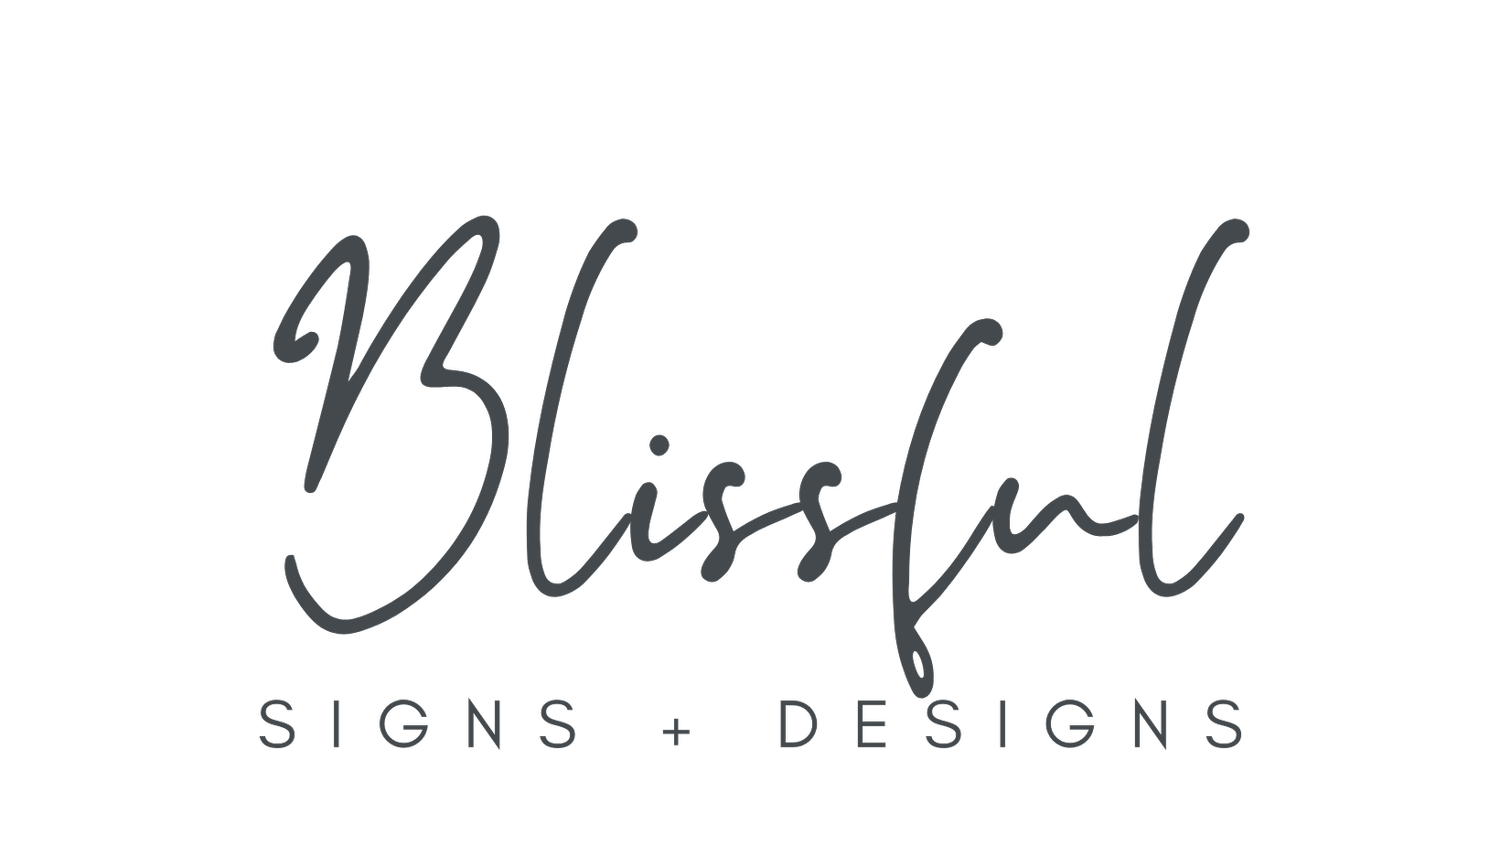 Blissful Signs + Designs